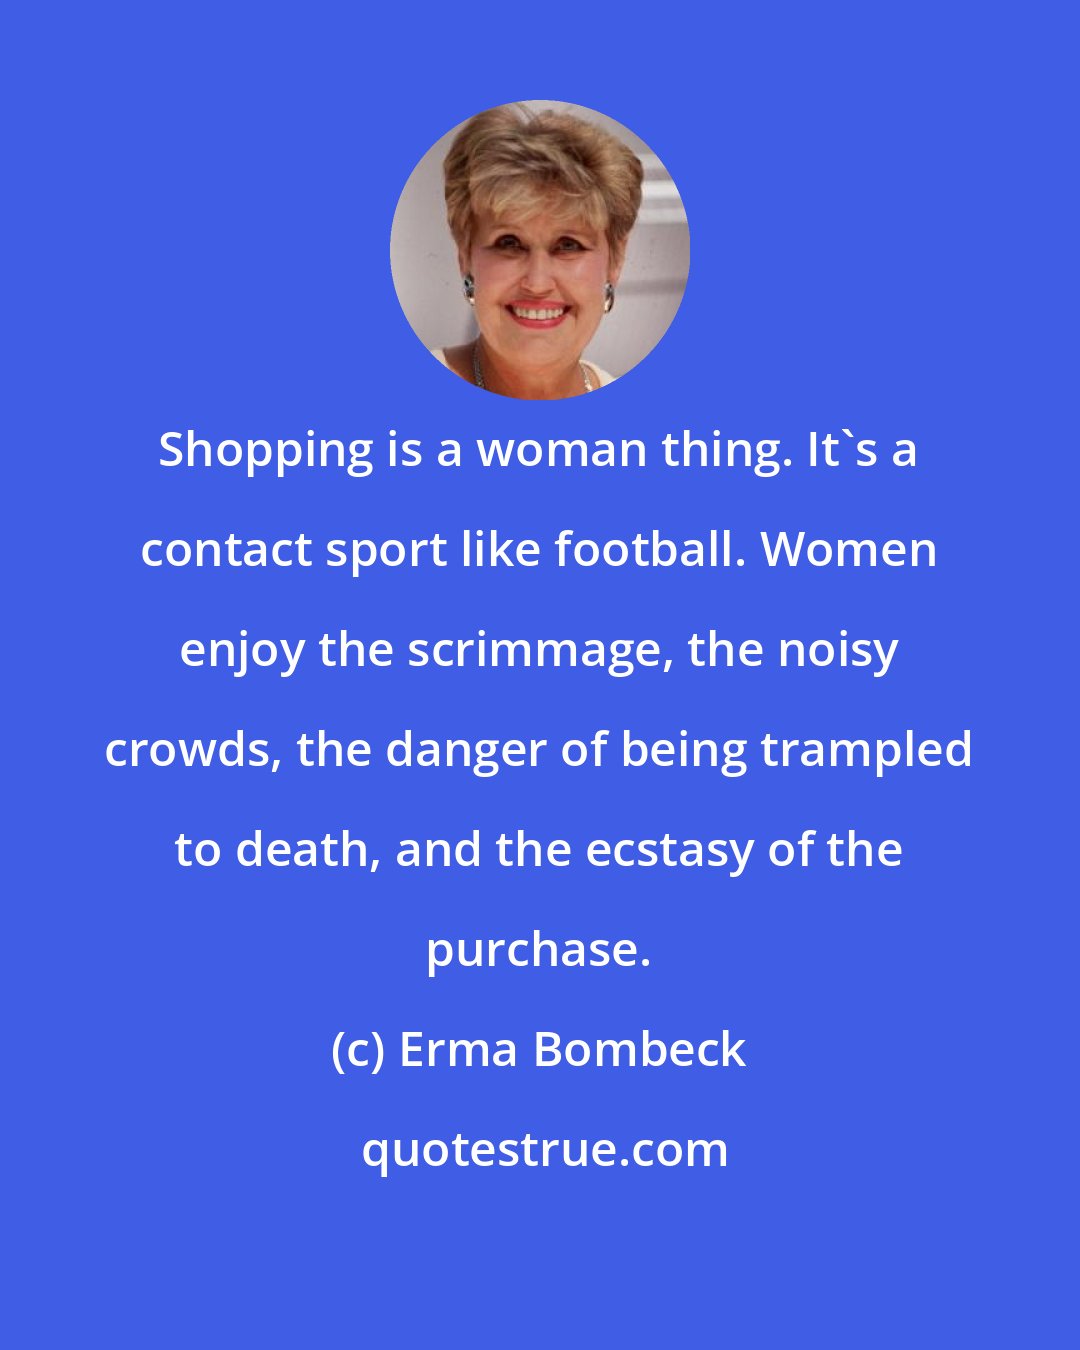 Erma Bombeck: Shopping is a woman thing. It's a contact sport like football. Women enjoy the scrimmage, the noisy crowds, the danger of being trampled to death, and the ecstasy of the purchase.